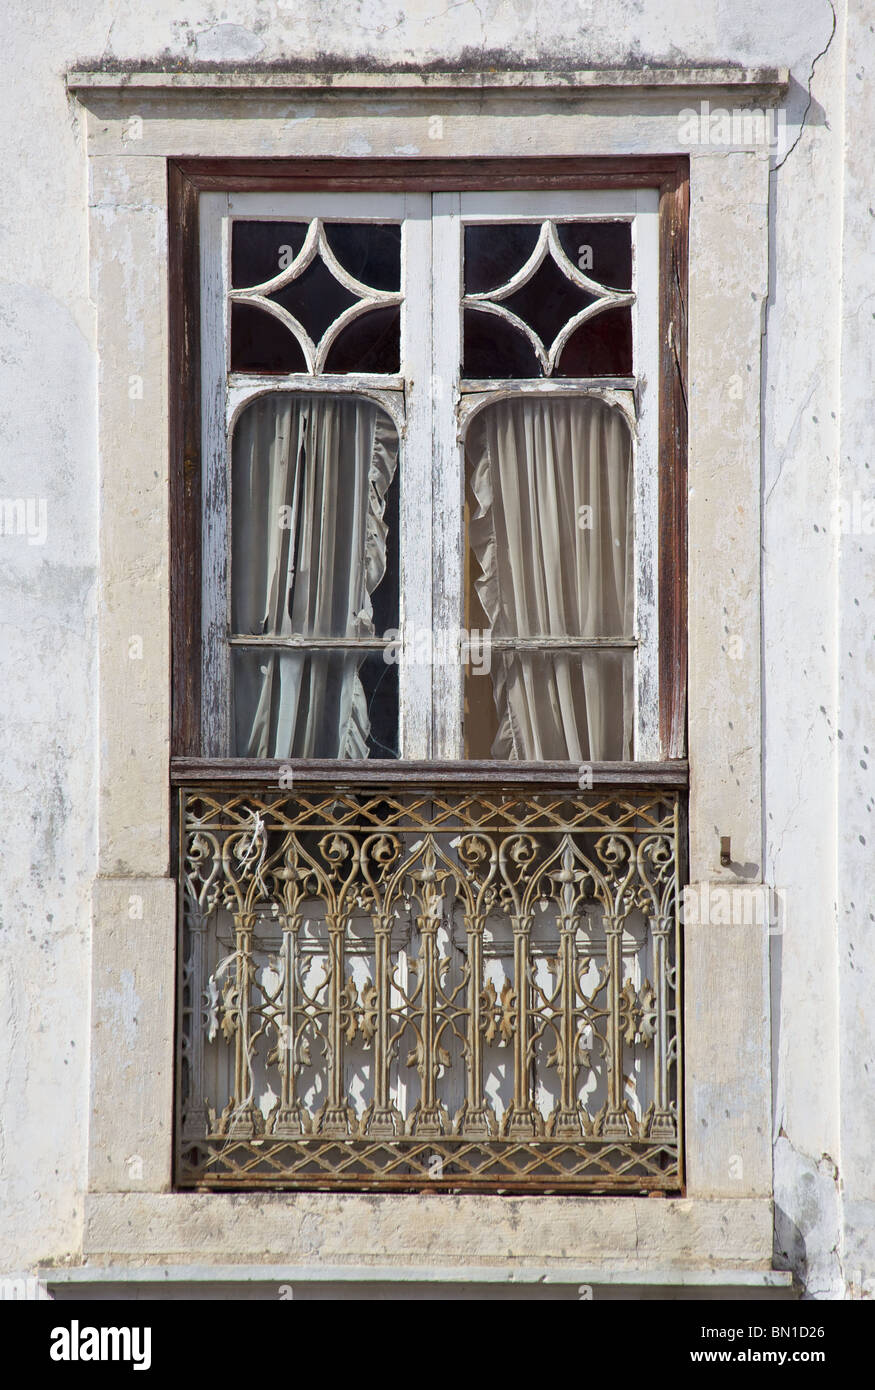 Rustic White Painted Window of Old World Europe with Wrought Iron Balcony Stock Photo